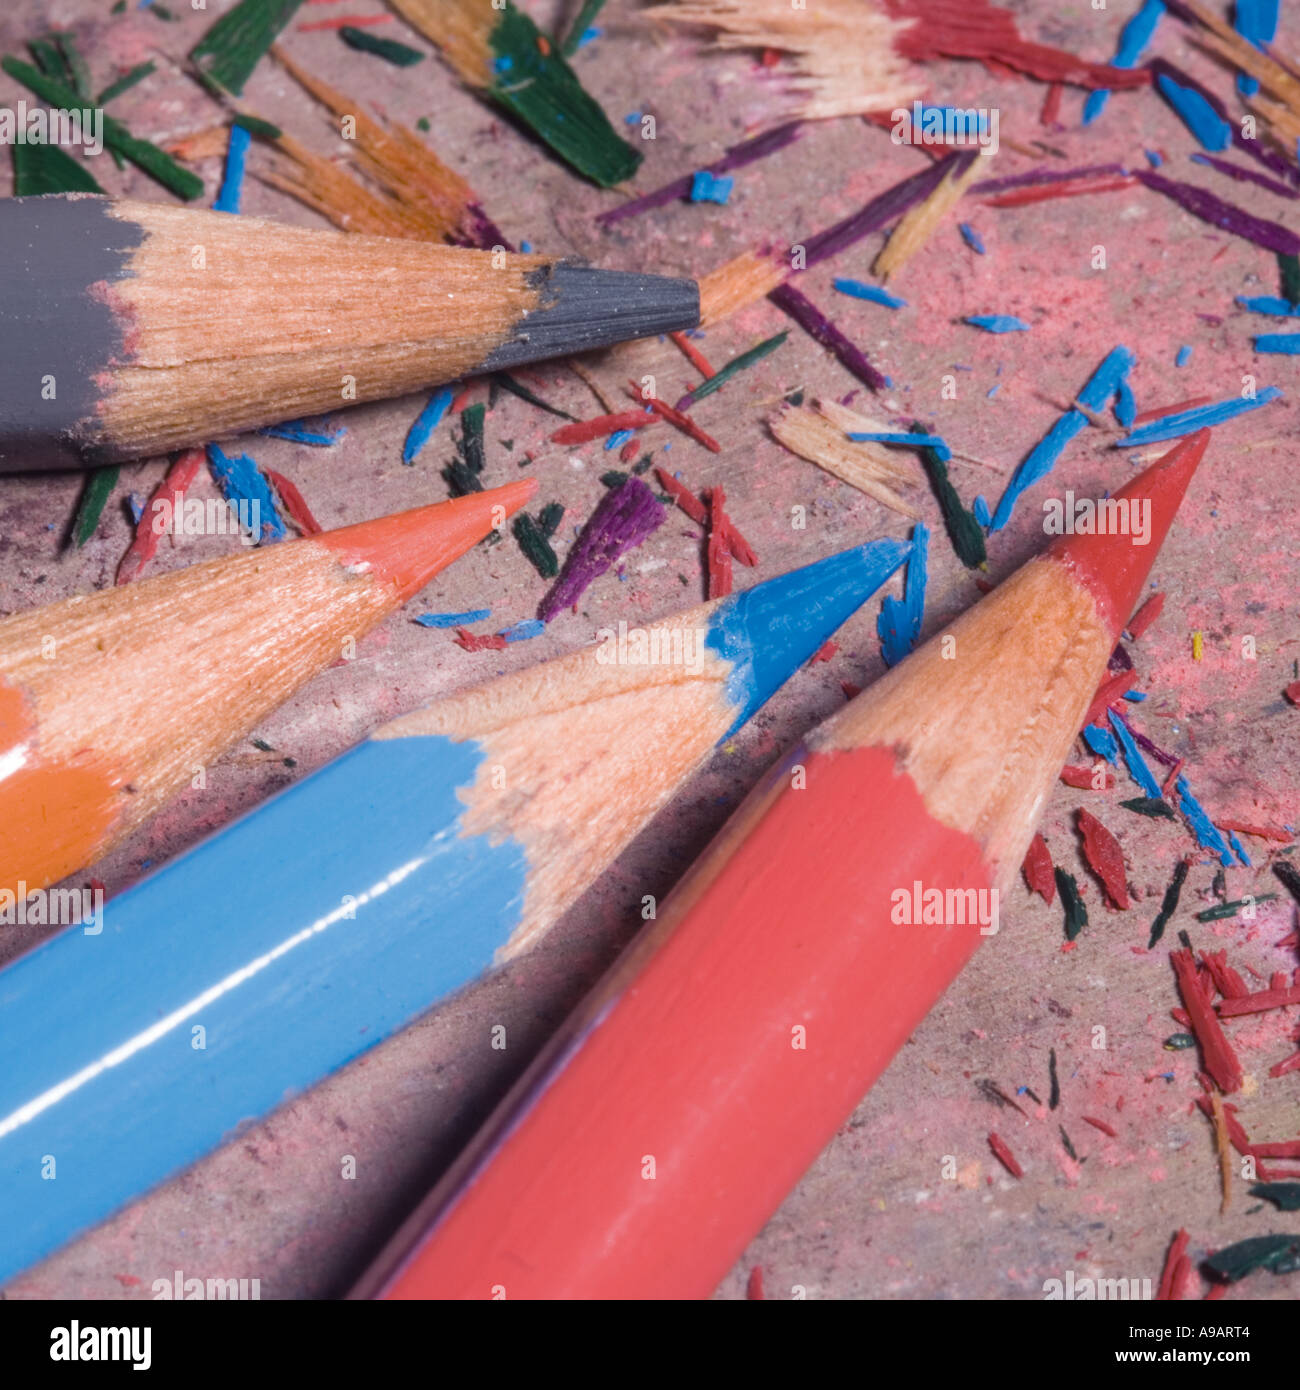 Sharpened coloured pencils and shavings Stock Photo